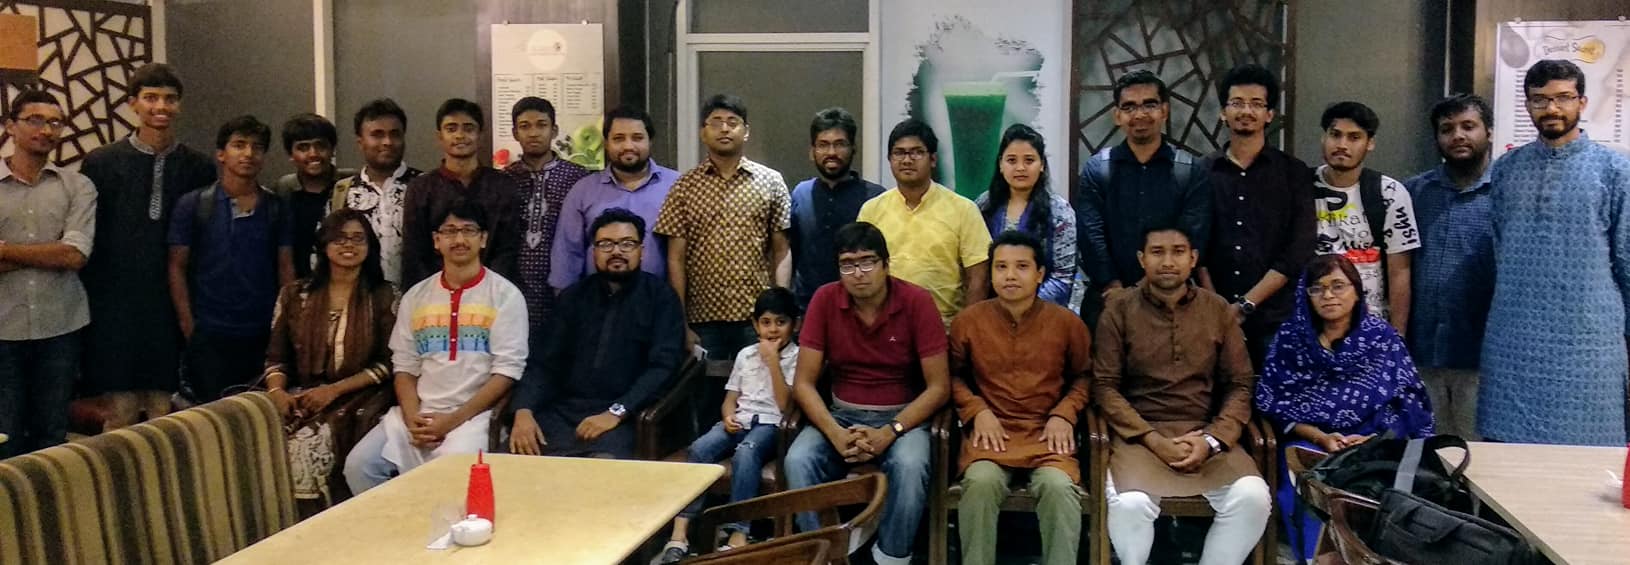 DSSE: A Software Engineering Research Group in Bangladesh